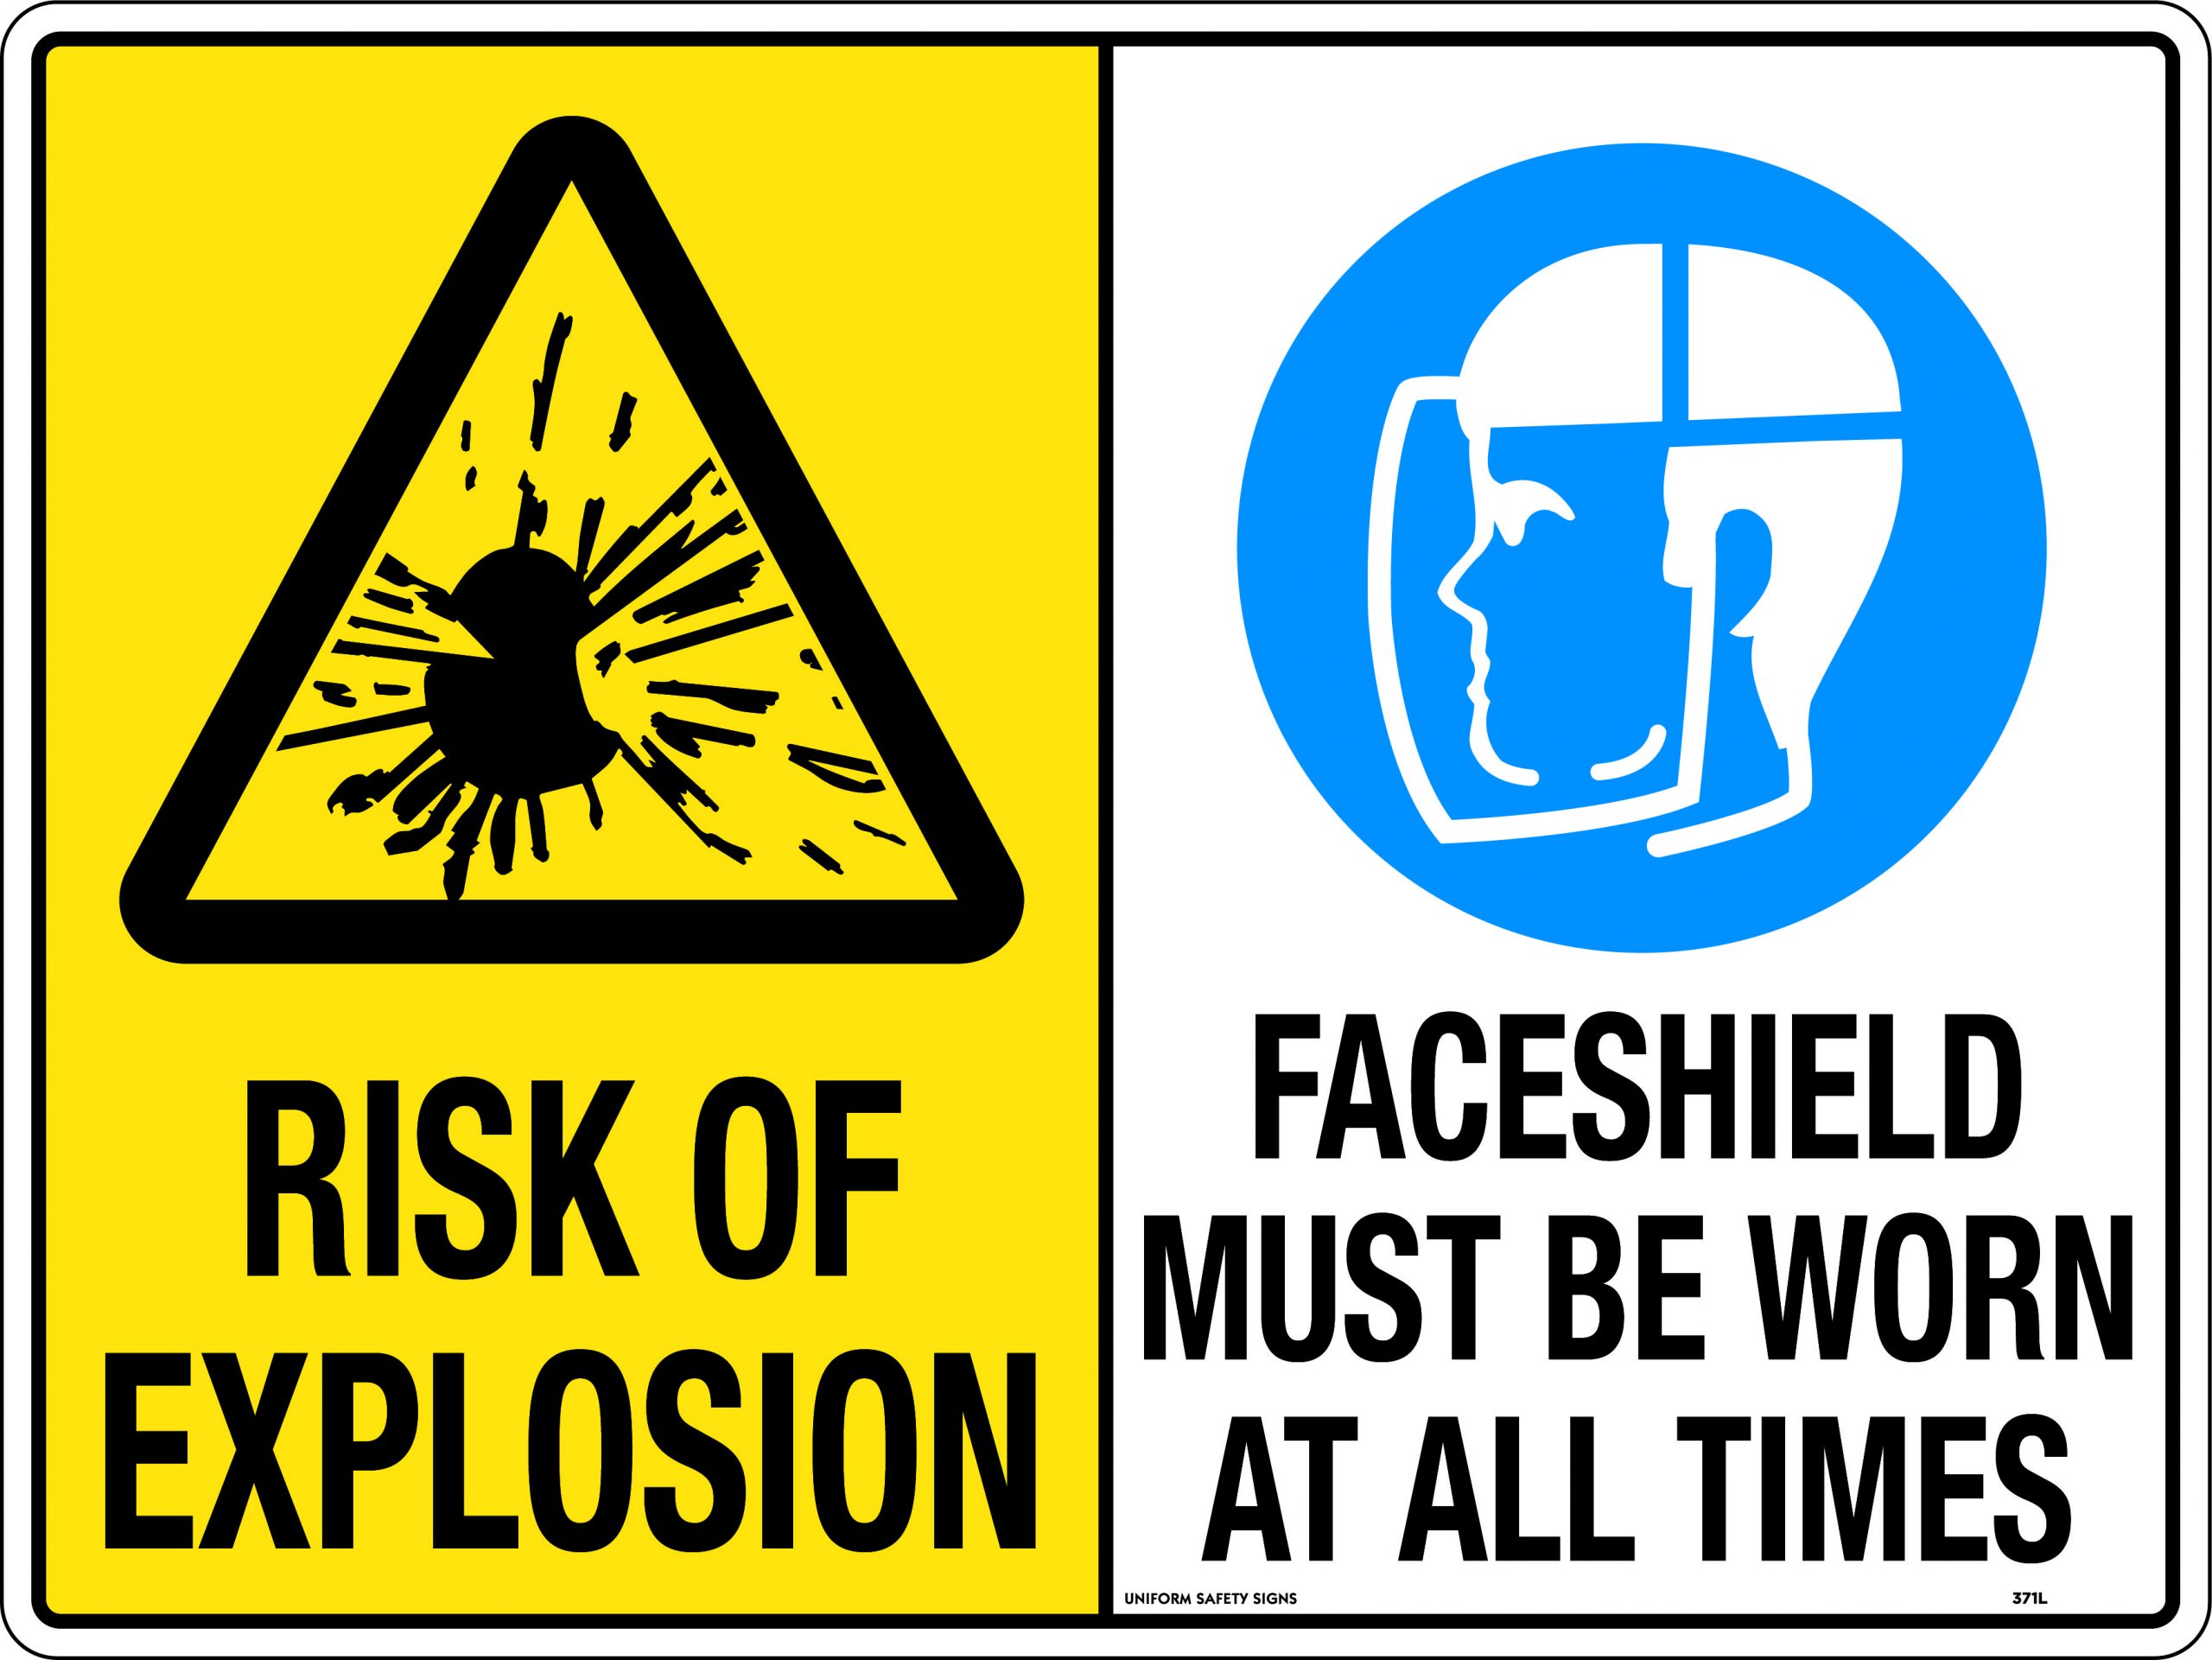 UNIFORM SAFETY 450X300MM POLY MULTI SIGN RISK OF EXPLOSION/FACE SHIELD